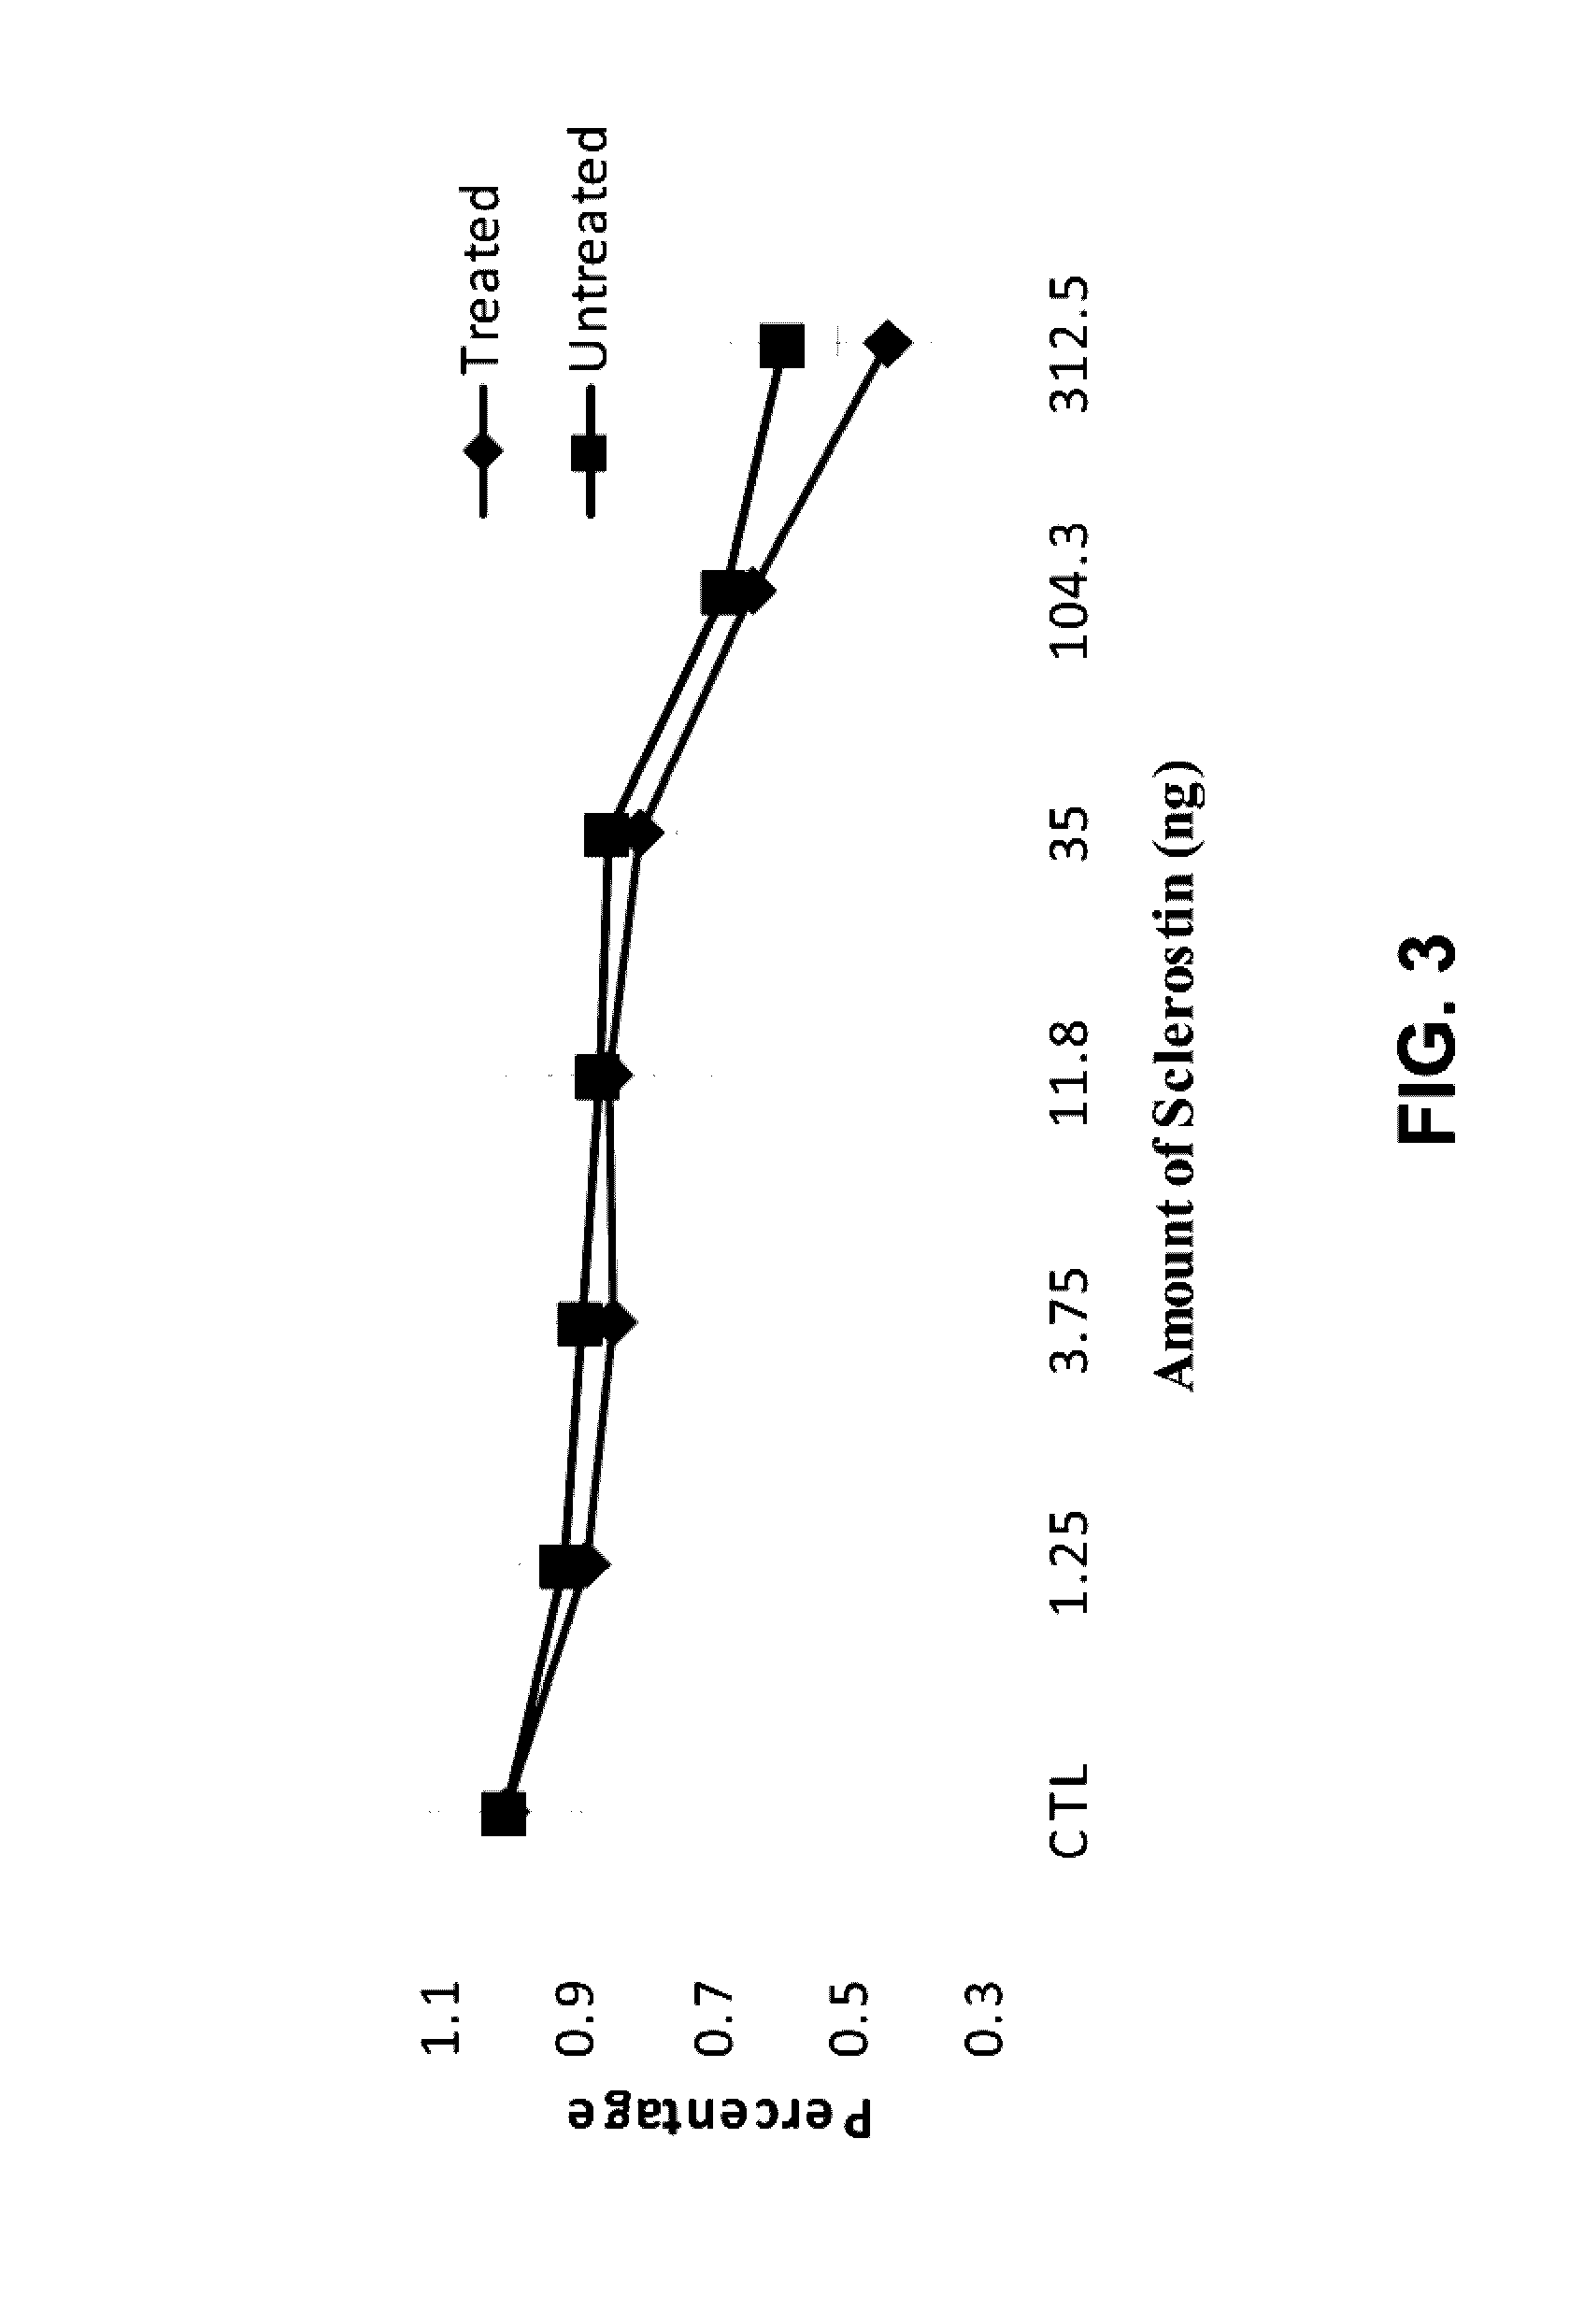 Antibodies specific for sulfated sclerostin